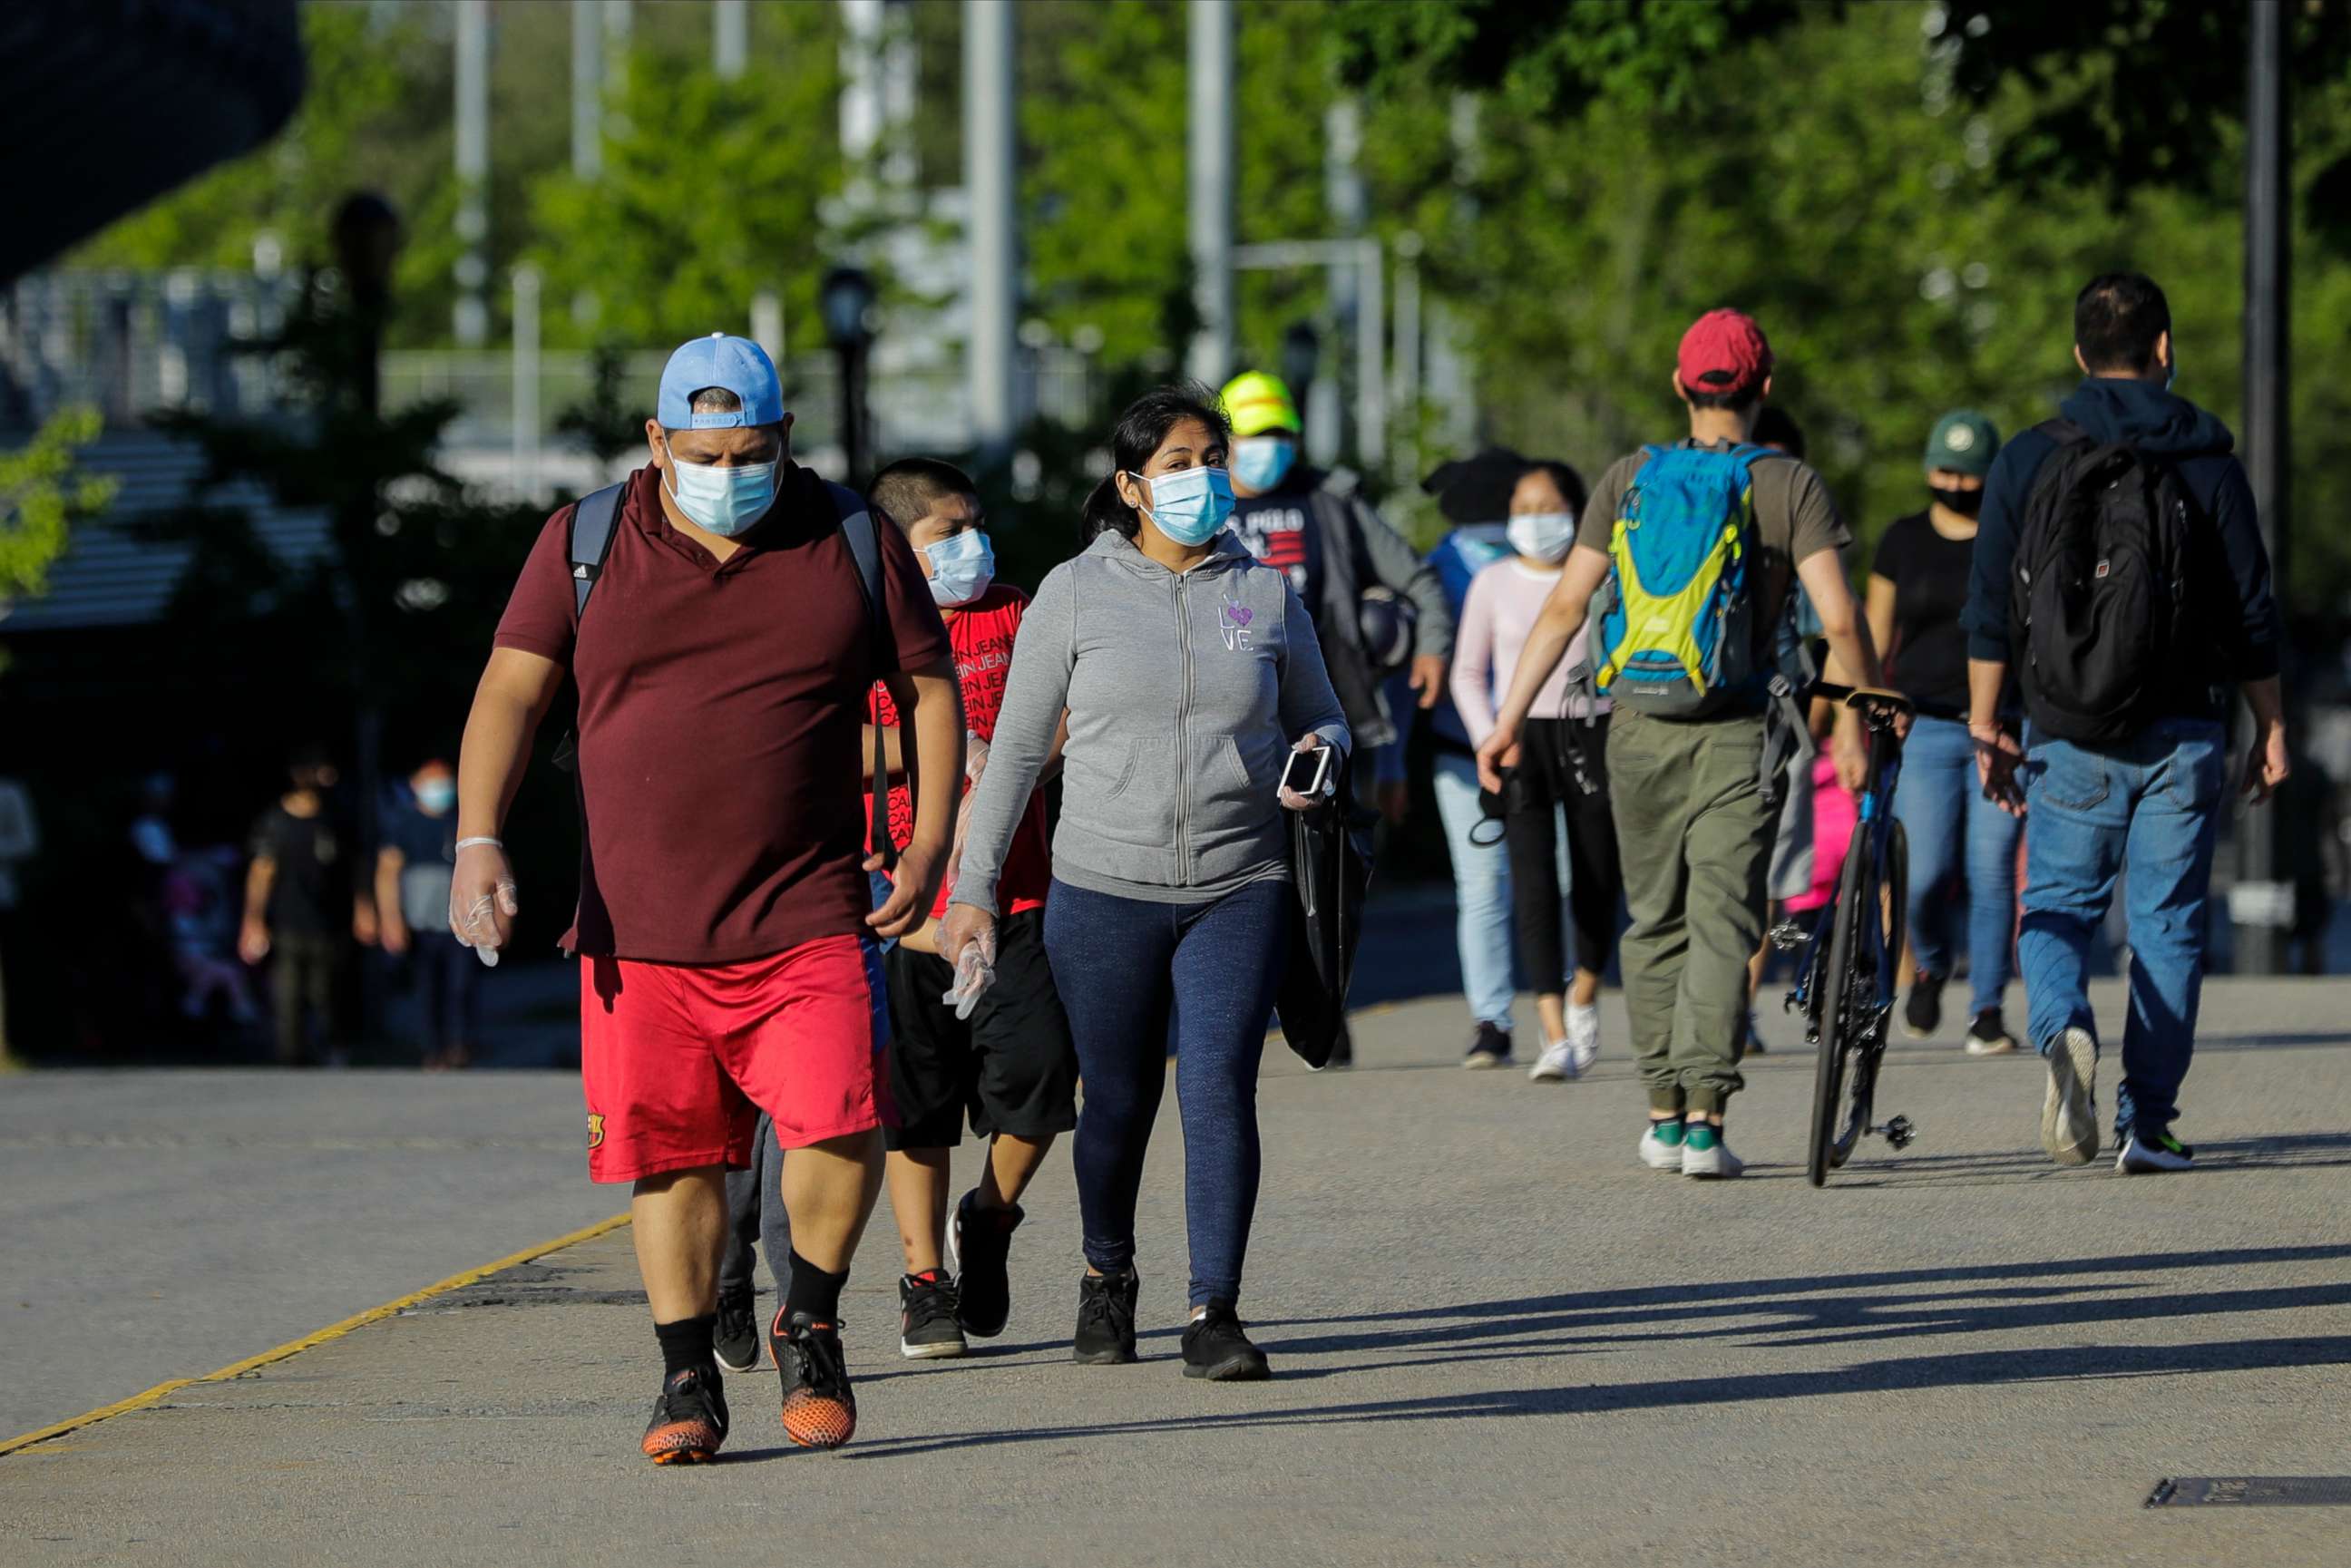 PHOTO: Pedestrians wear protective masks during the coronavirus pandemic as they enjoy warm weather in Flushing Meadows Corona Park, May 26, 2020, in Queens, New York.